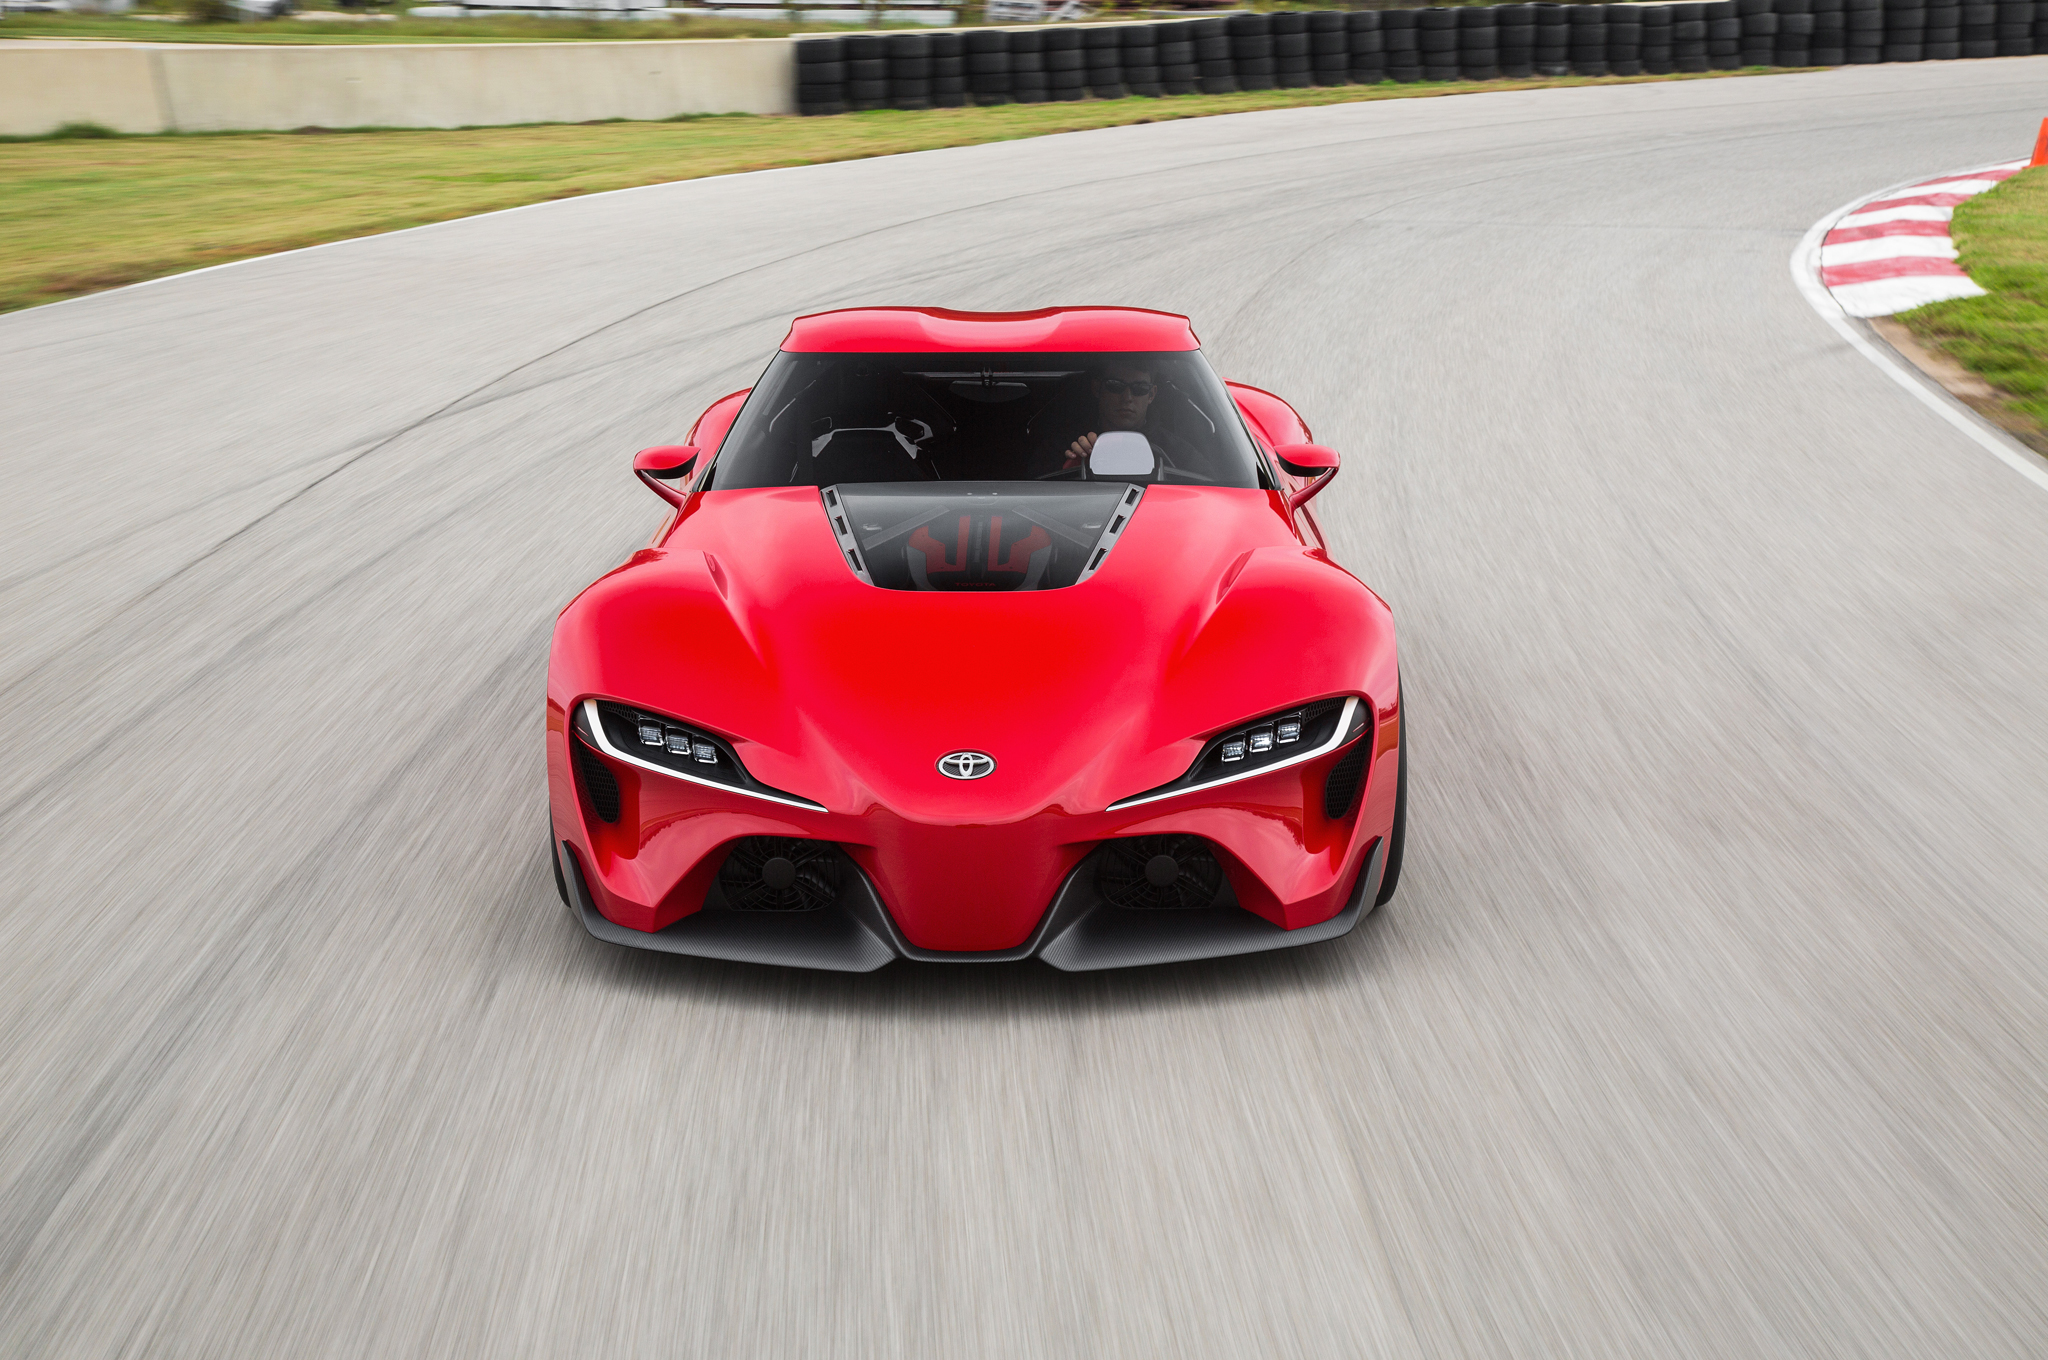 Toyota-FT-1-front-end-in-motion.jpg